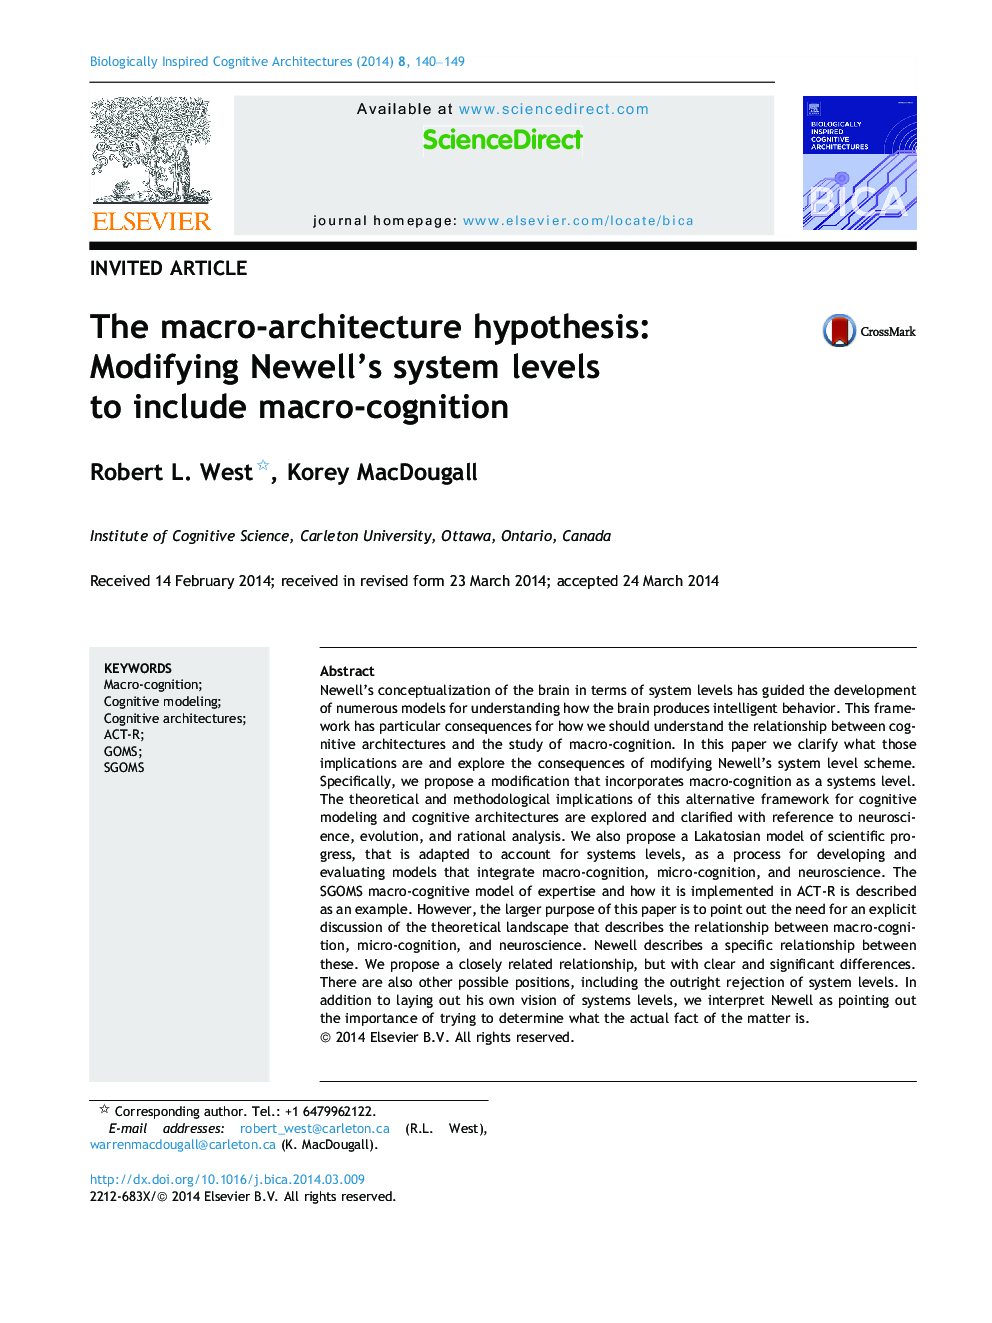 The macro-architecture hypothesis: Modifying Newell’s system levels to include macro-cognition